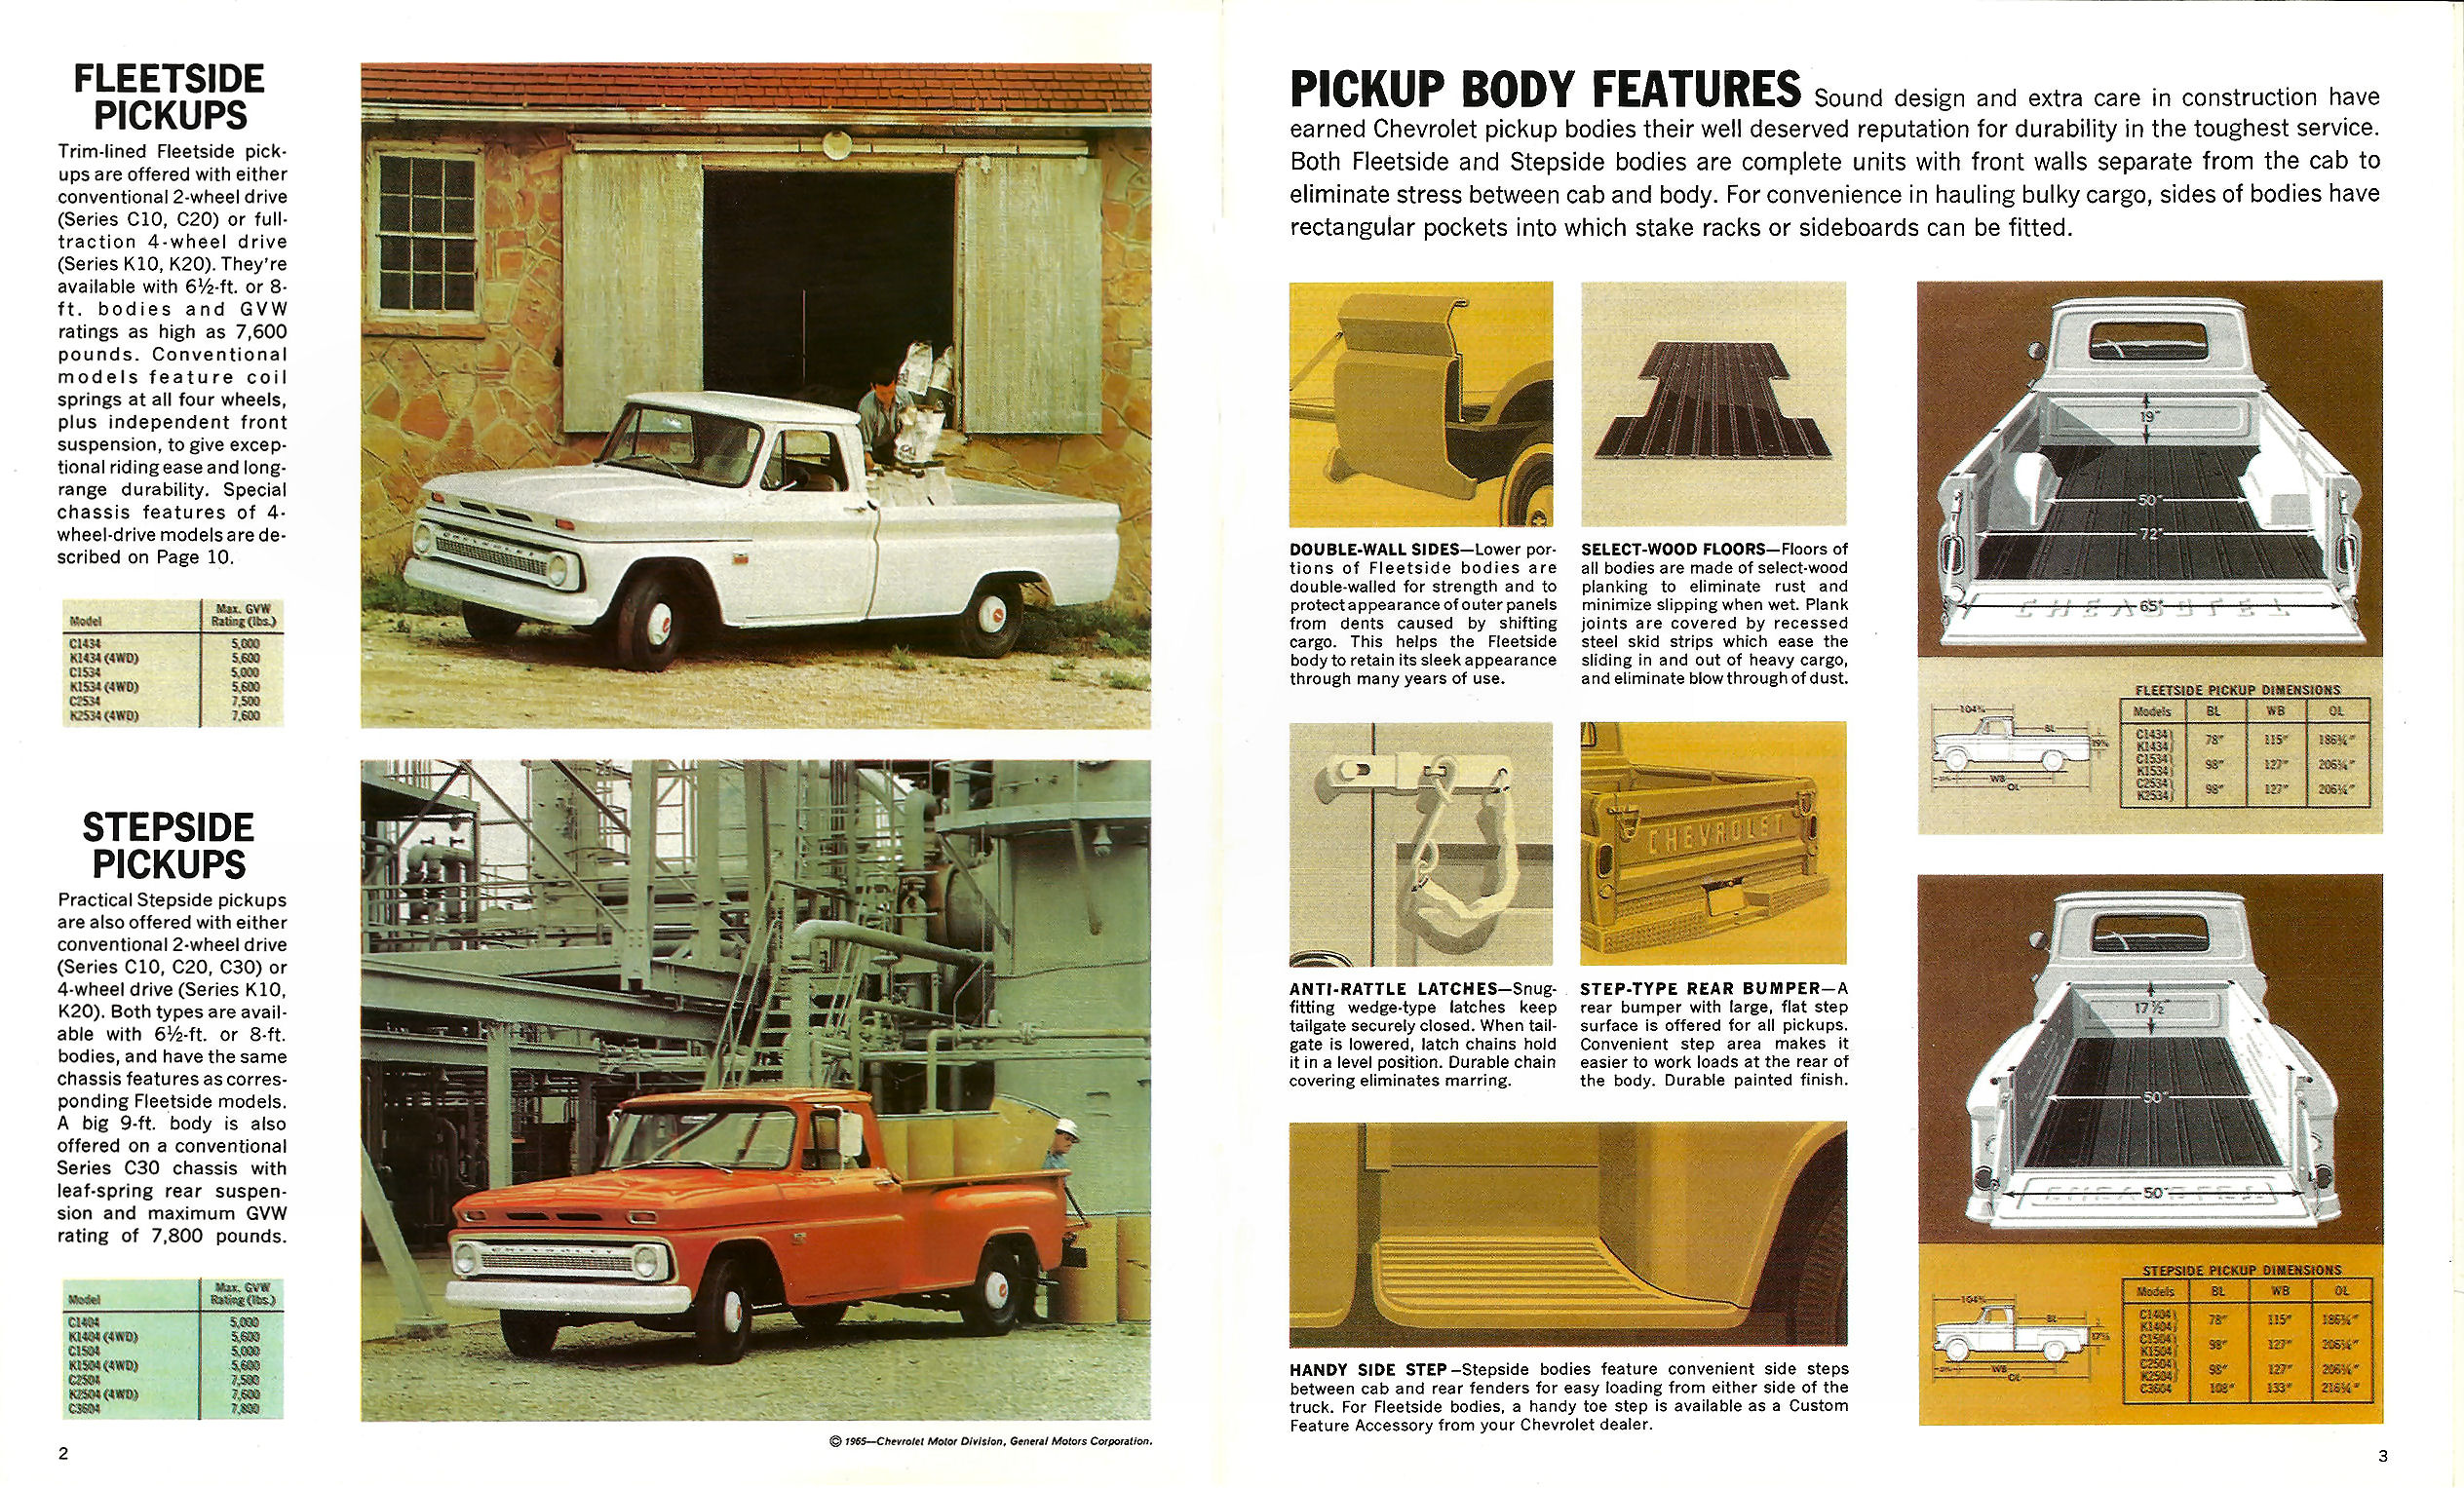 1966_Chevrolet_Pickups-Stakes_R1-02-03